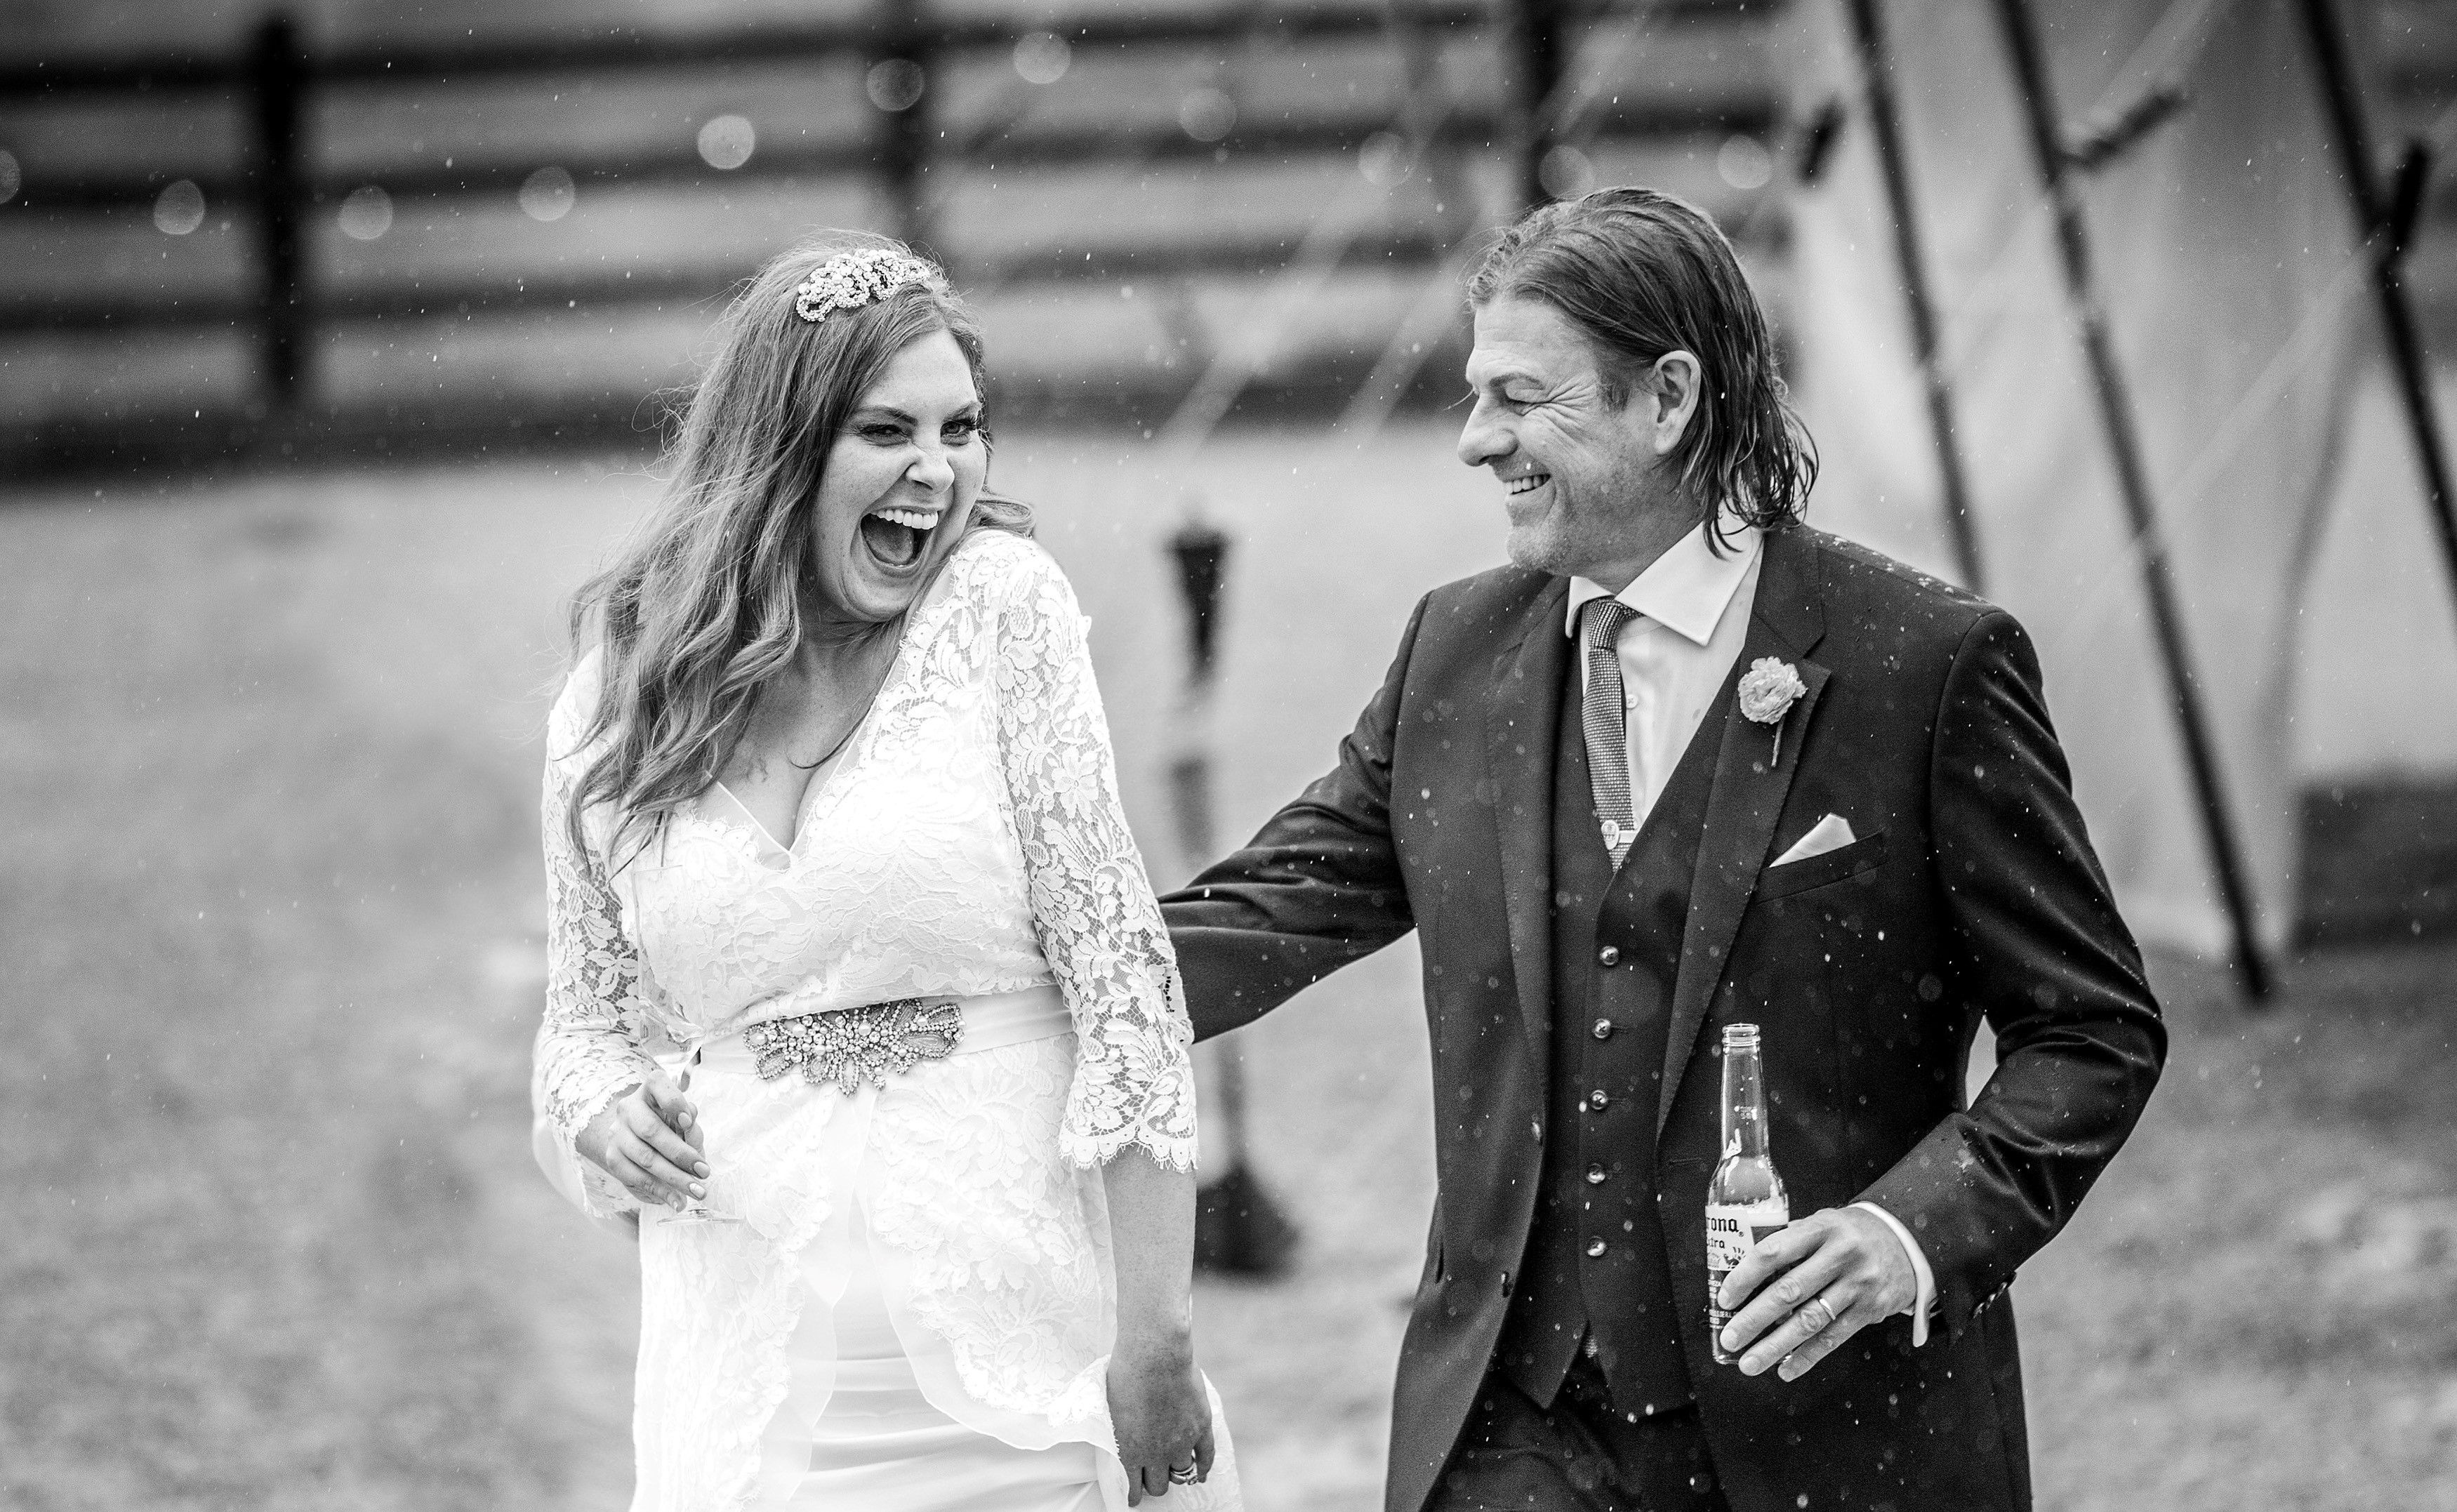 Game of Thrones star Sean Bean and his wife Ashley at their wedding in Dorset. (PA Wire)